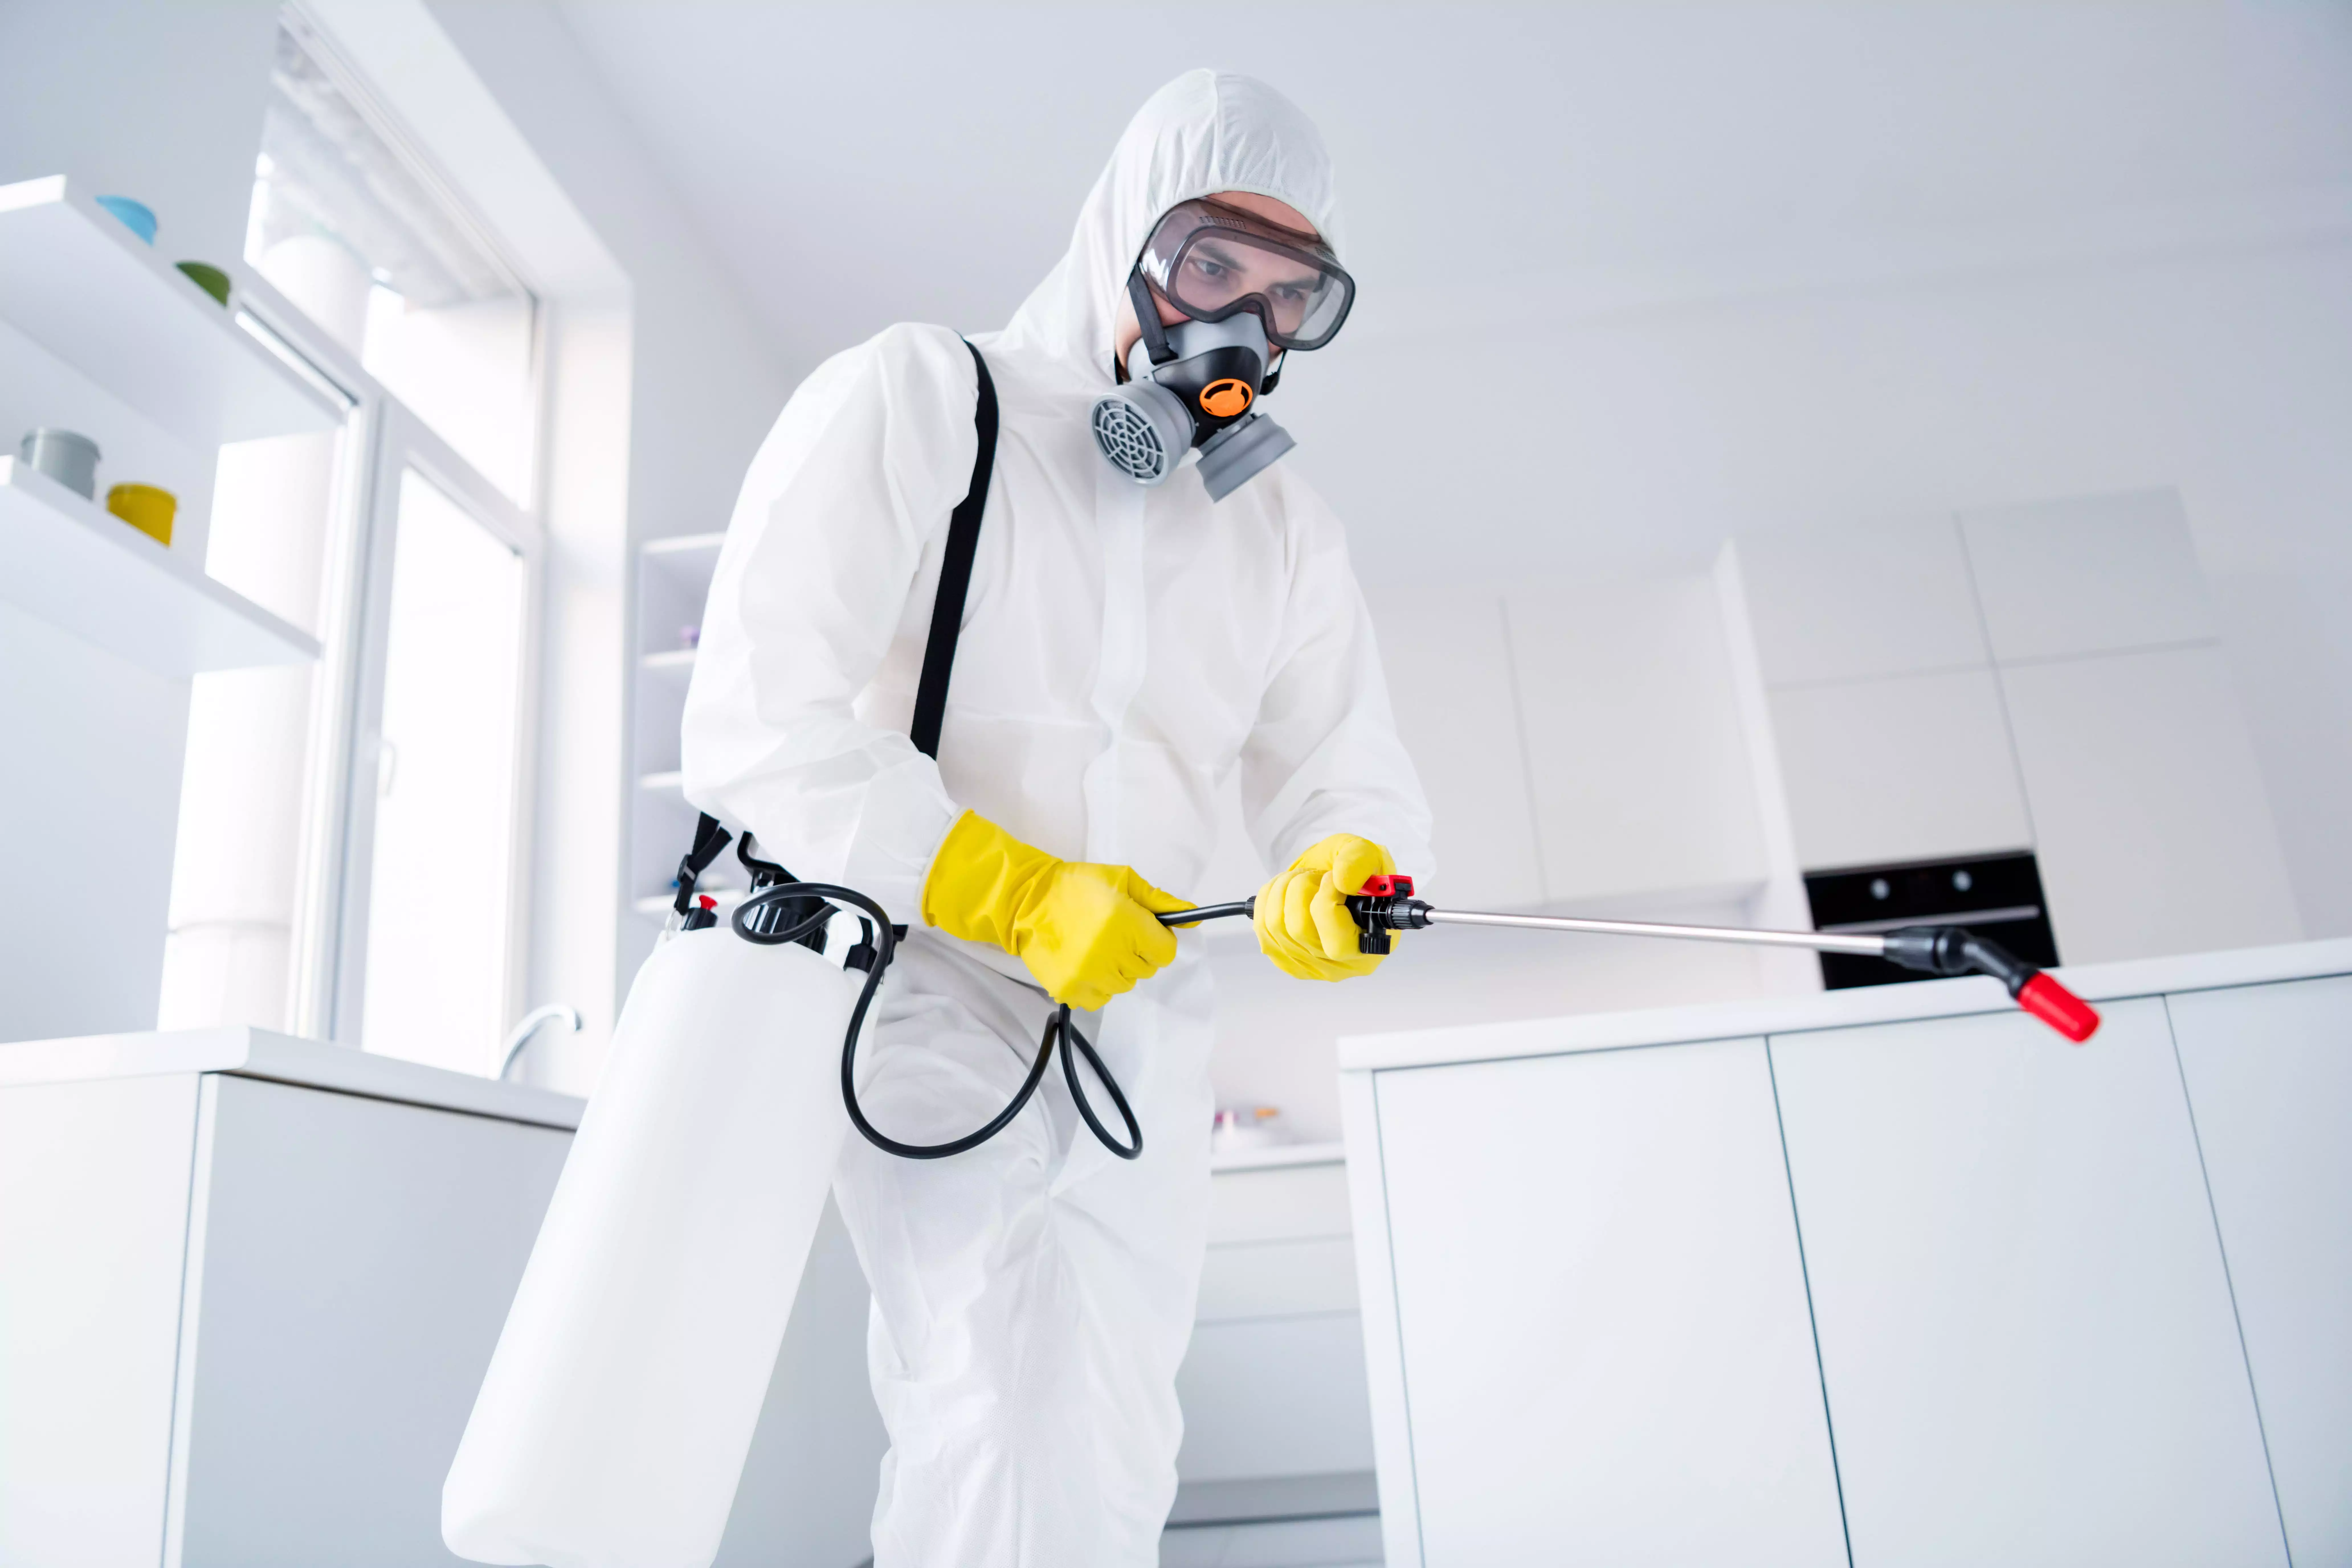 professional crime scene cleaning cleaning a homicide scene